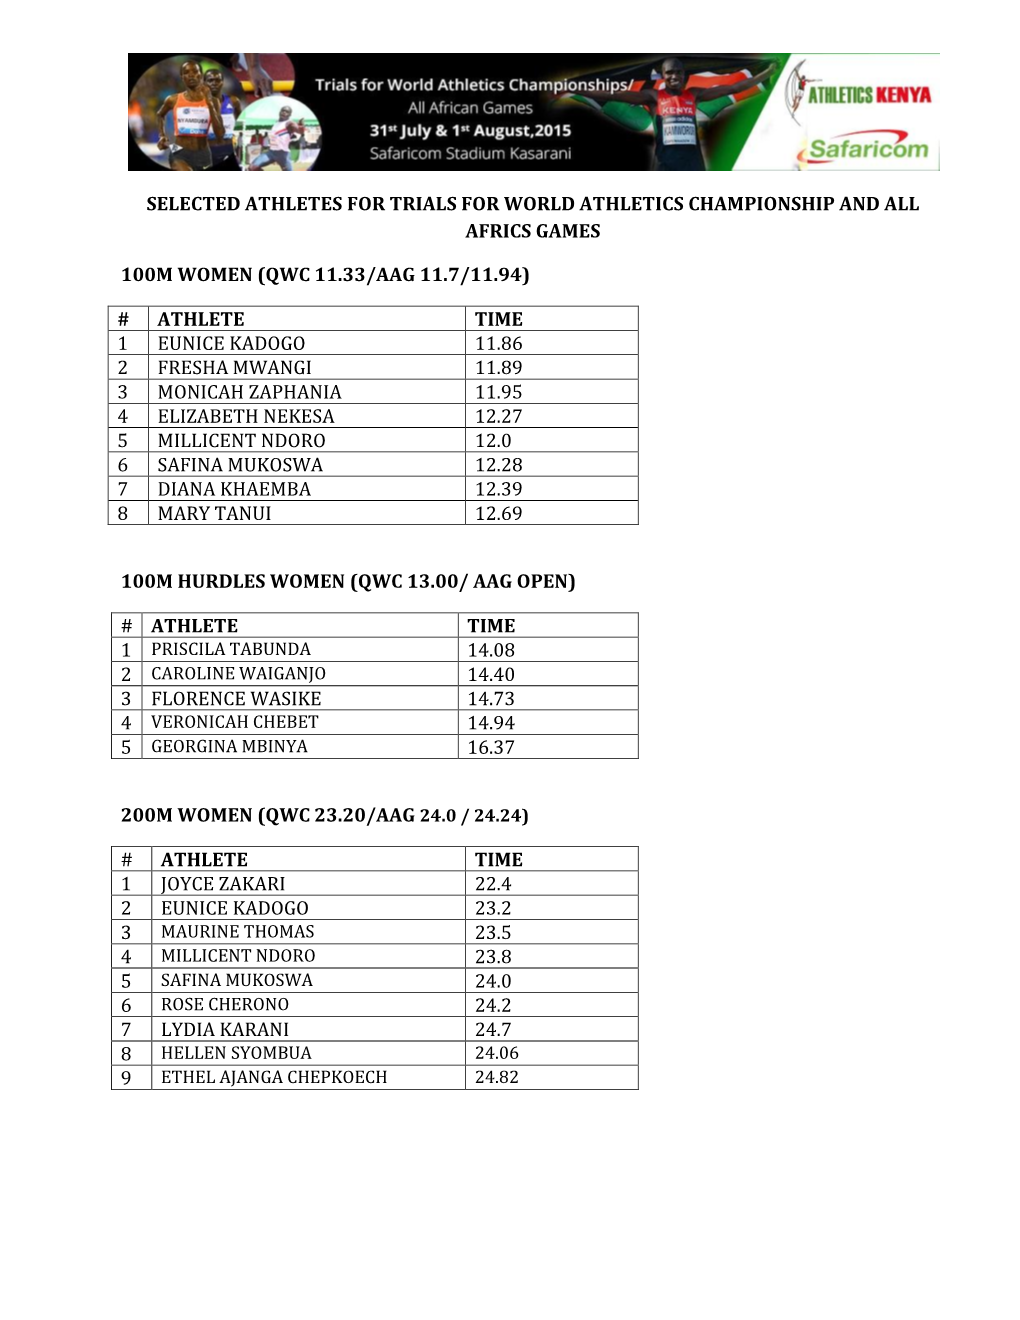 Selected Athletes for Trials for World Athletics Championship and All Africs Games